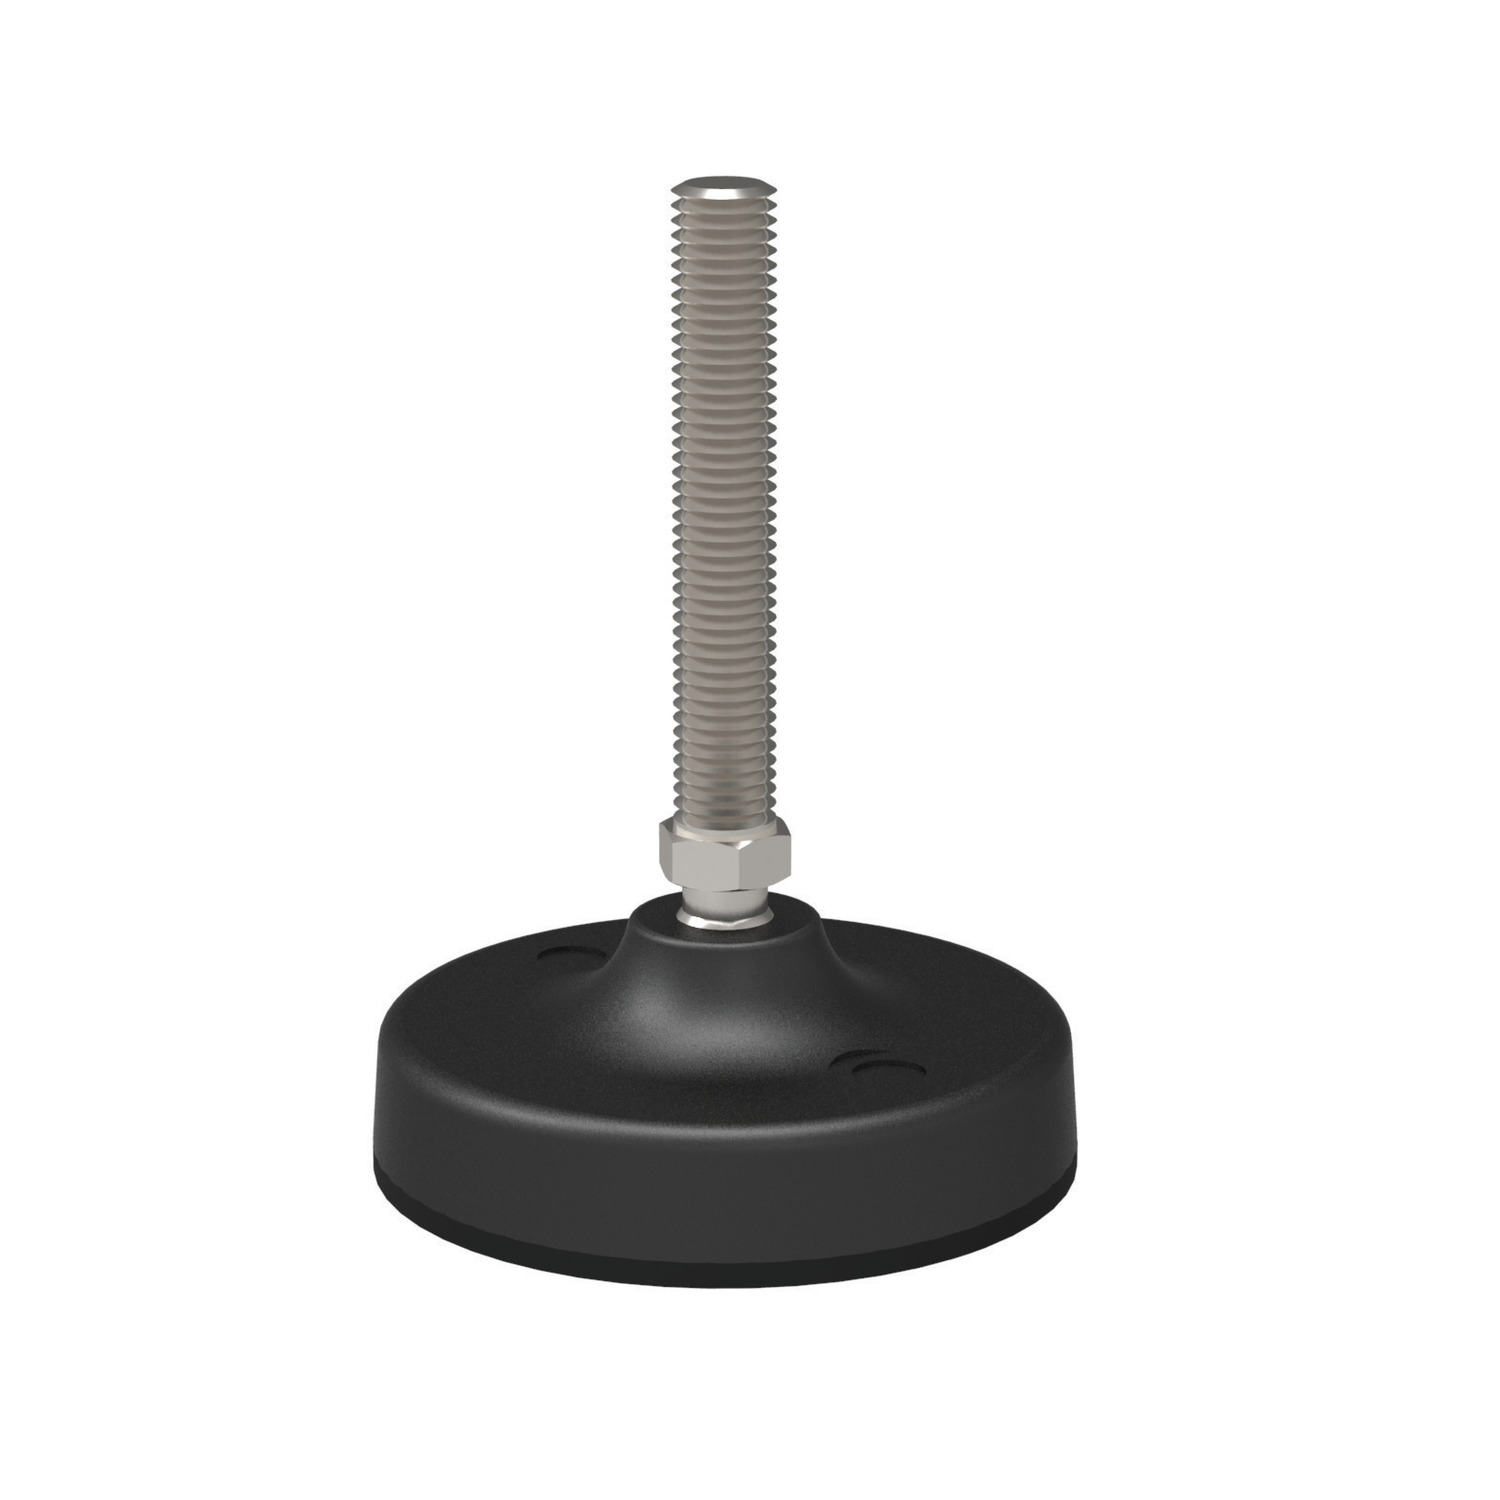 Product 34746, Levelling Feet - Heavy Duty bolt down option, bolt stainless steel / 